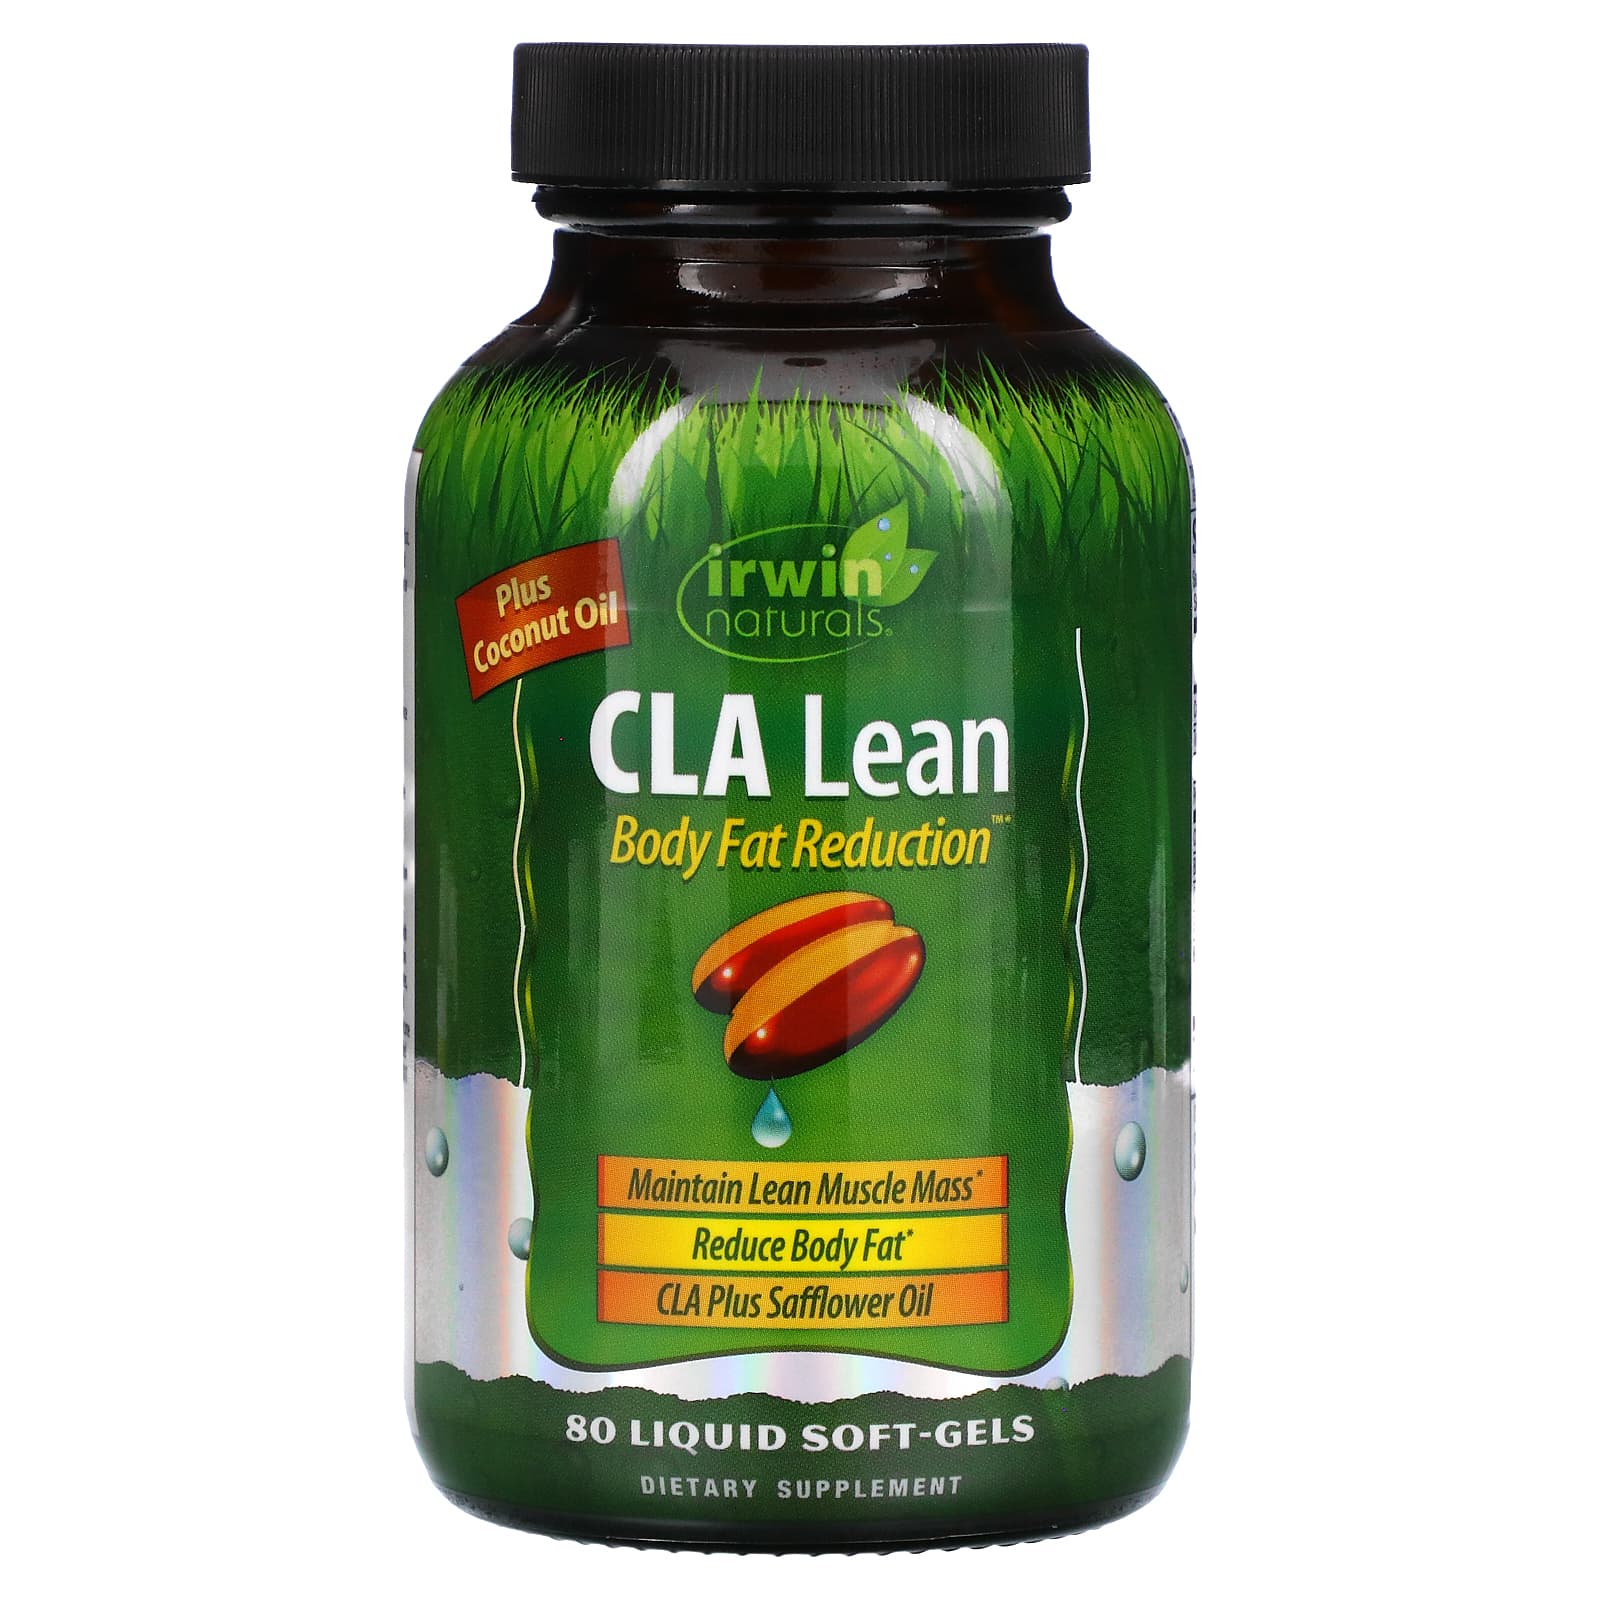 Irwin Naturals CLA Lean Body Fat Reduction High Potency Conjugated Linoleic Acid - Weight Management Supplement & Exercise Enhancement With Safflower & Coconut Oil - 80 Liquid Softgels